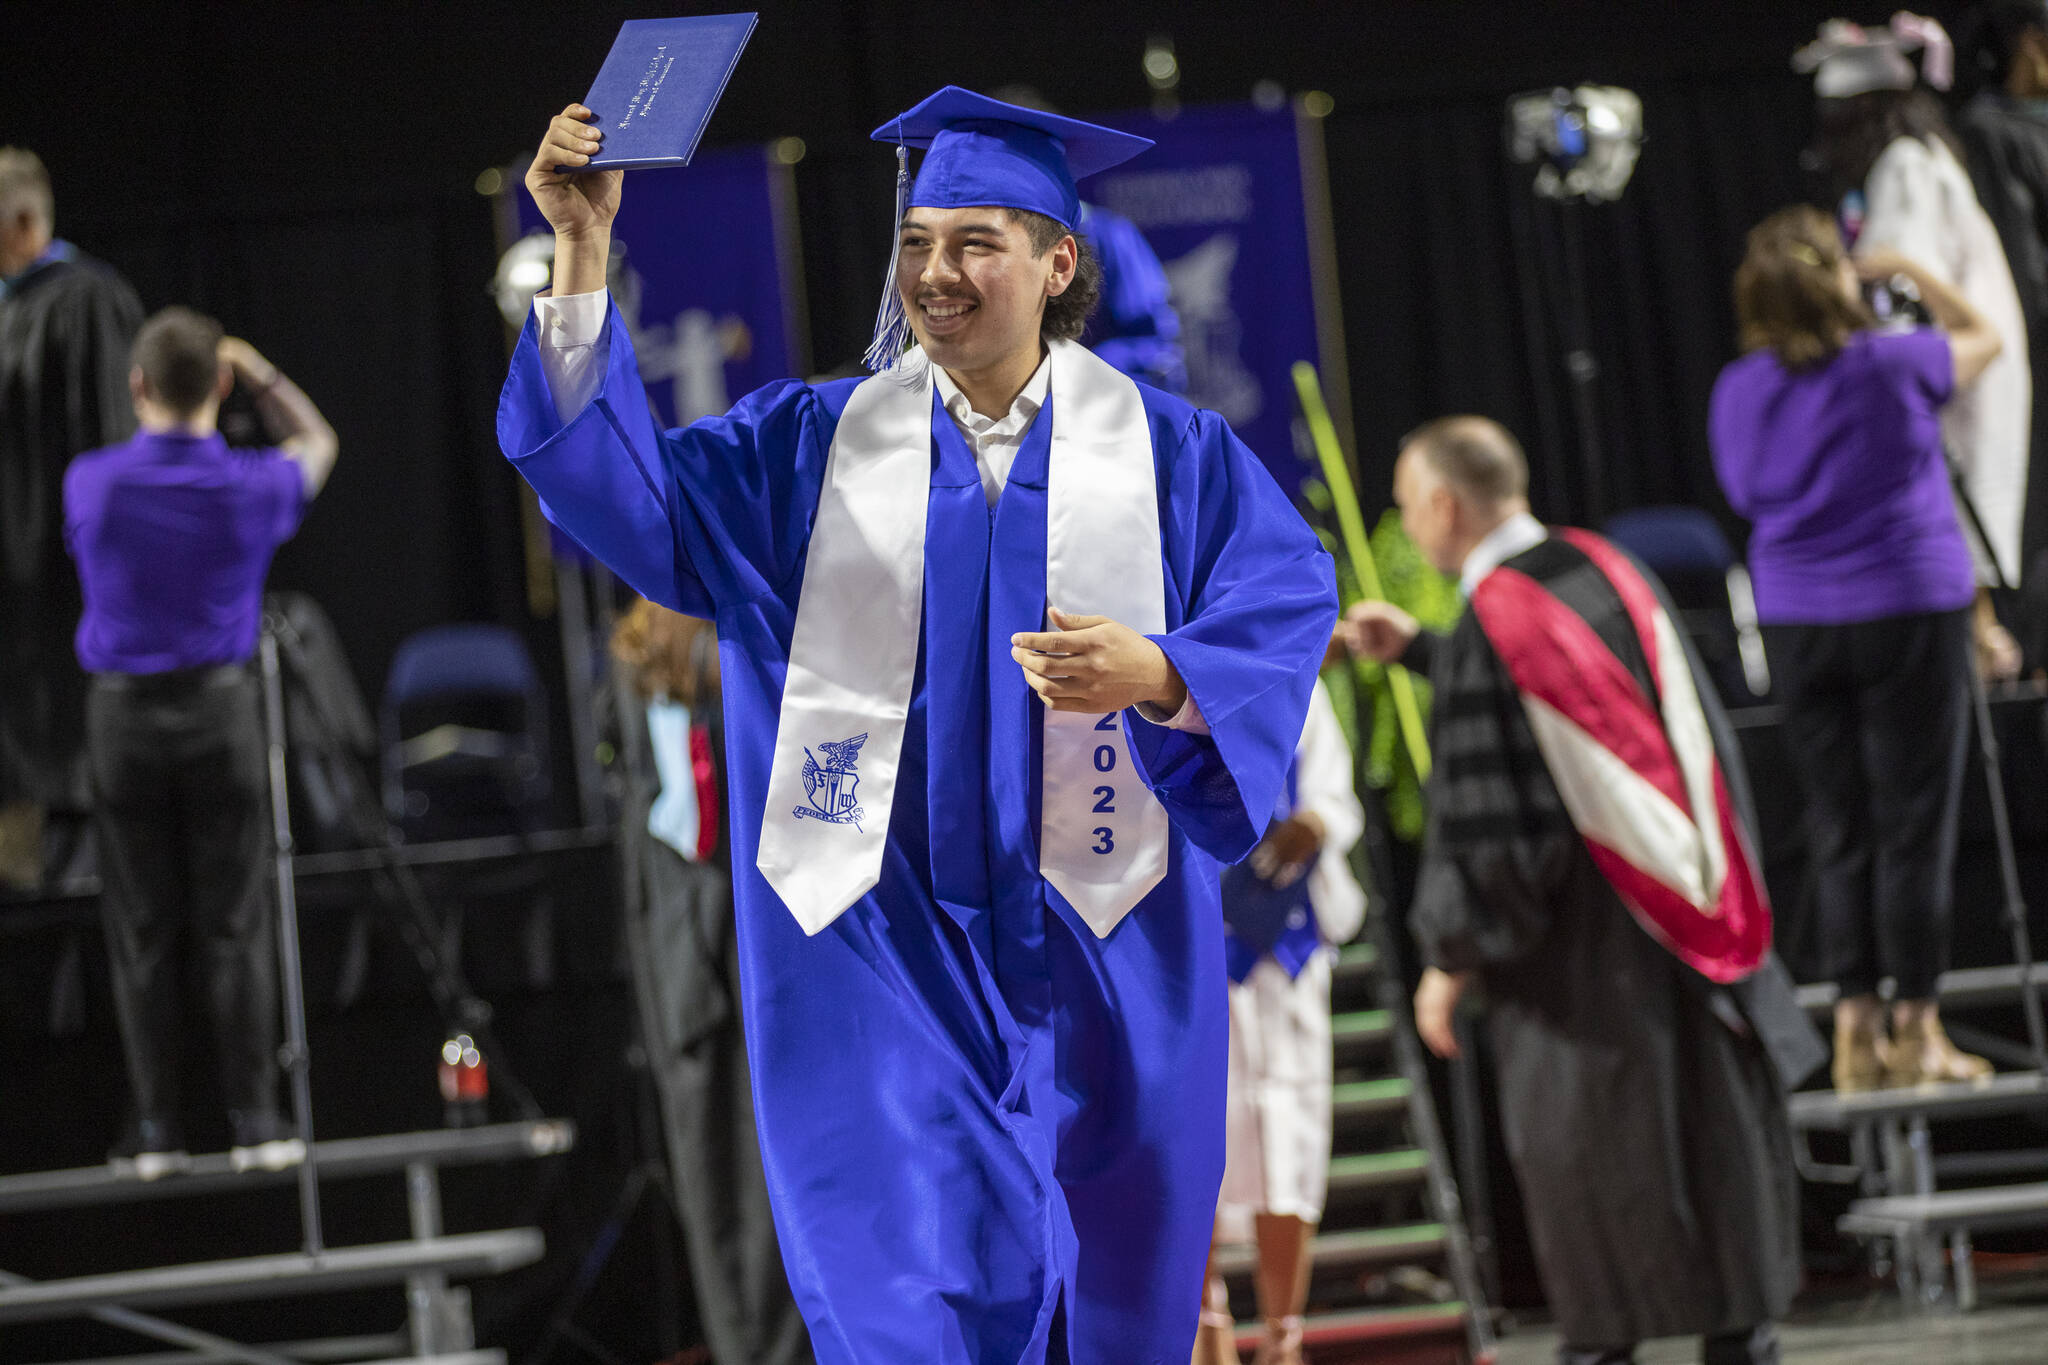 Photo courtesy Federal Way School District. 
A Federal Way High School graduate shows off the diploma.